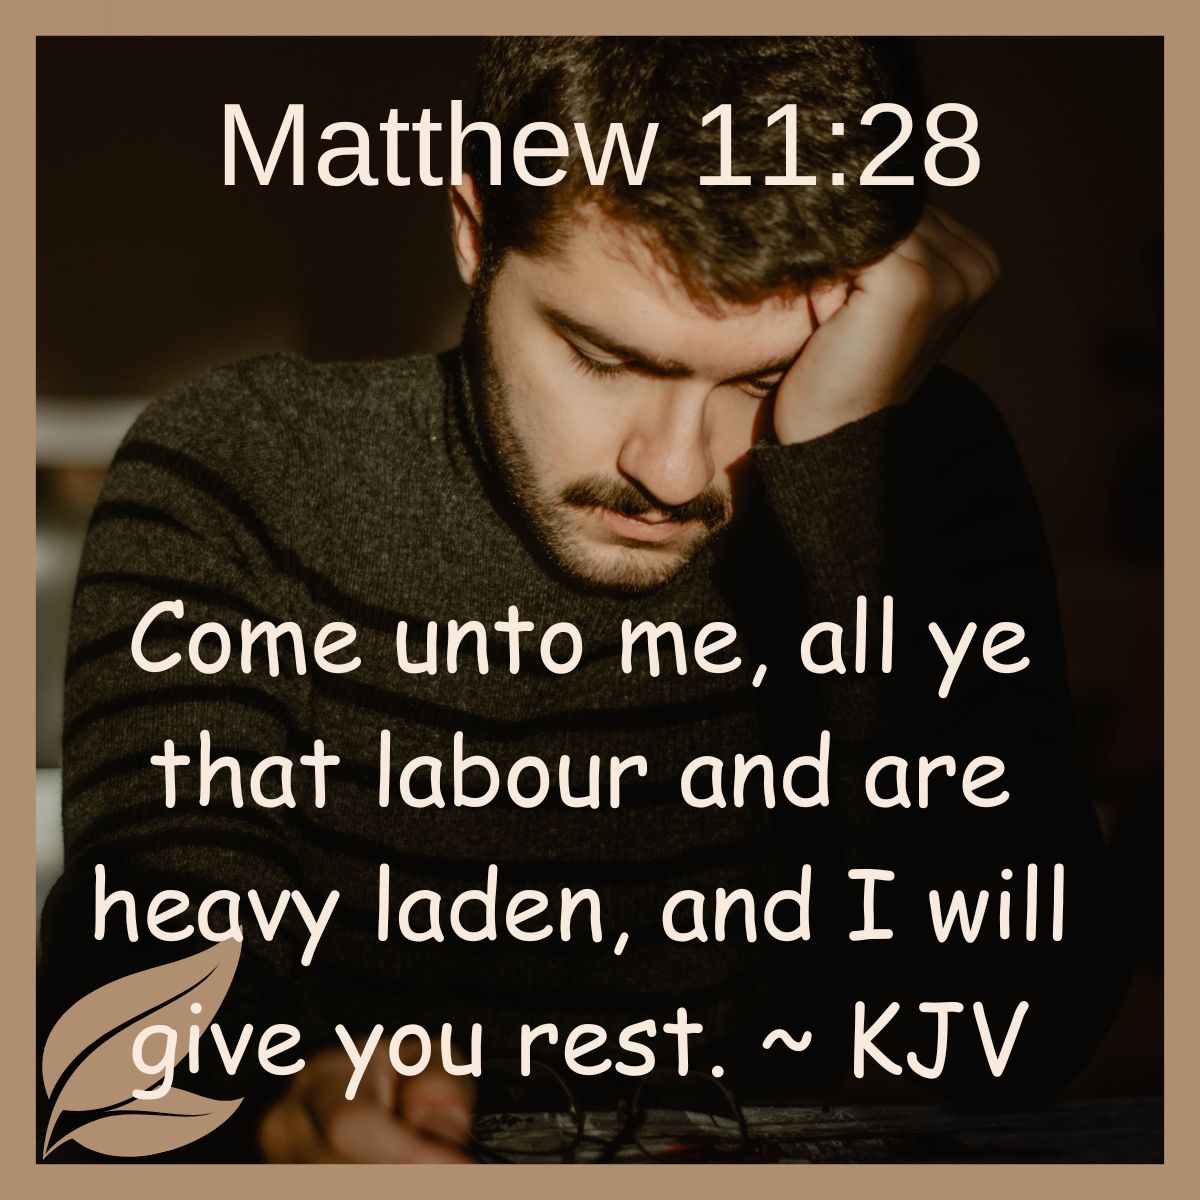 Come unto me, all ye that labour and are heavy laden, and I will give you rest. Matthew 11:28